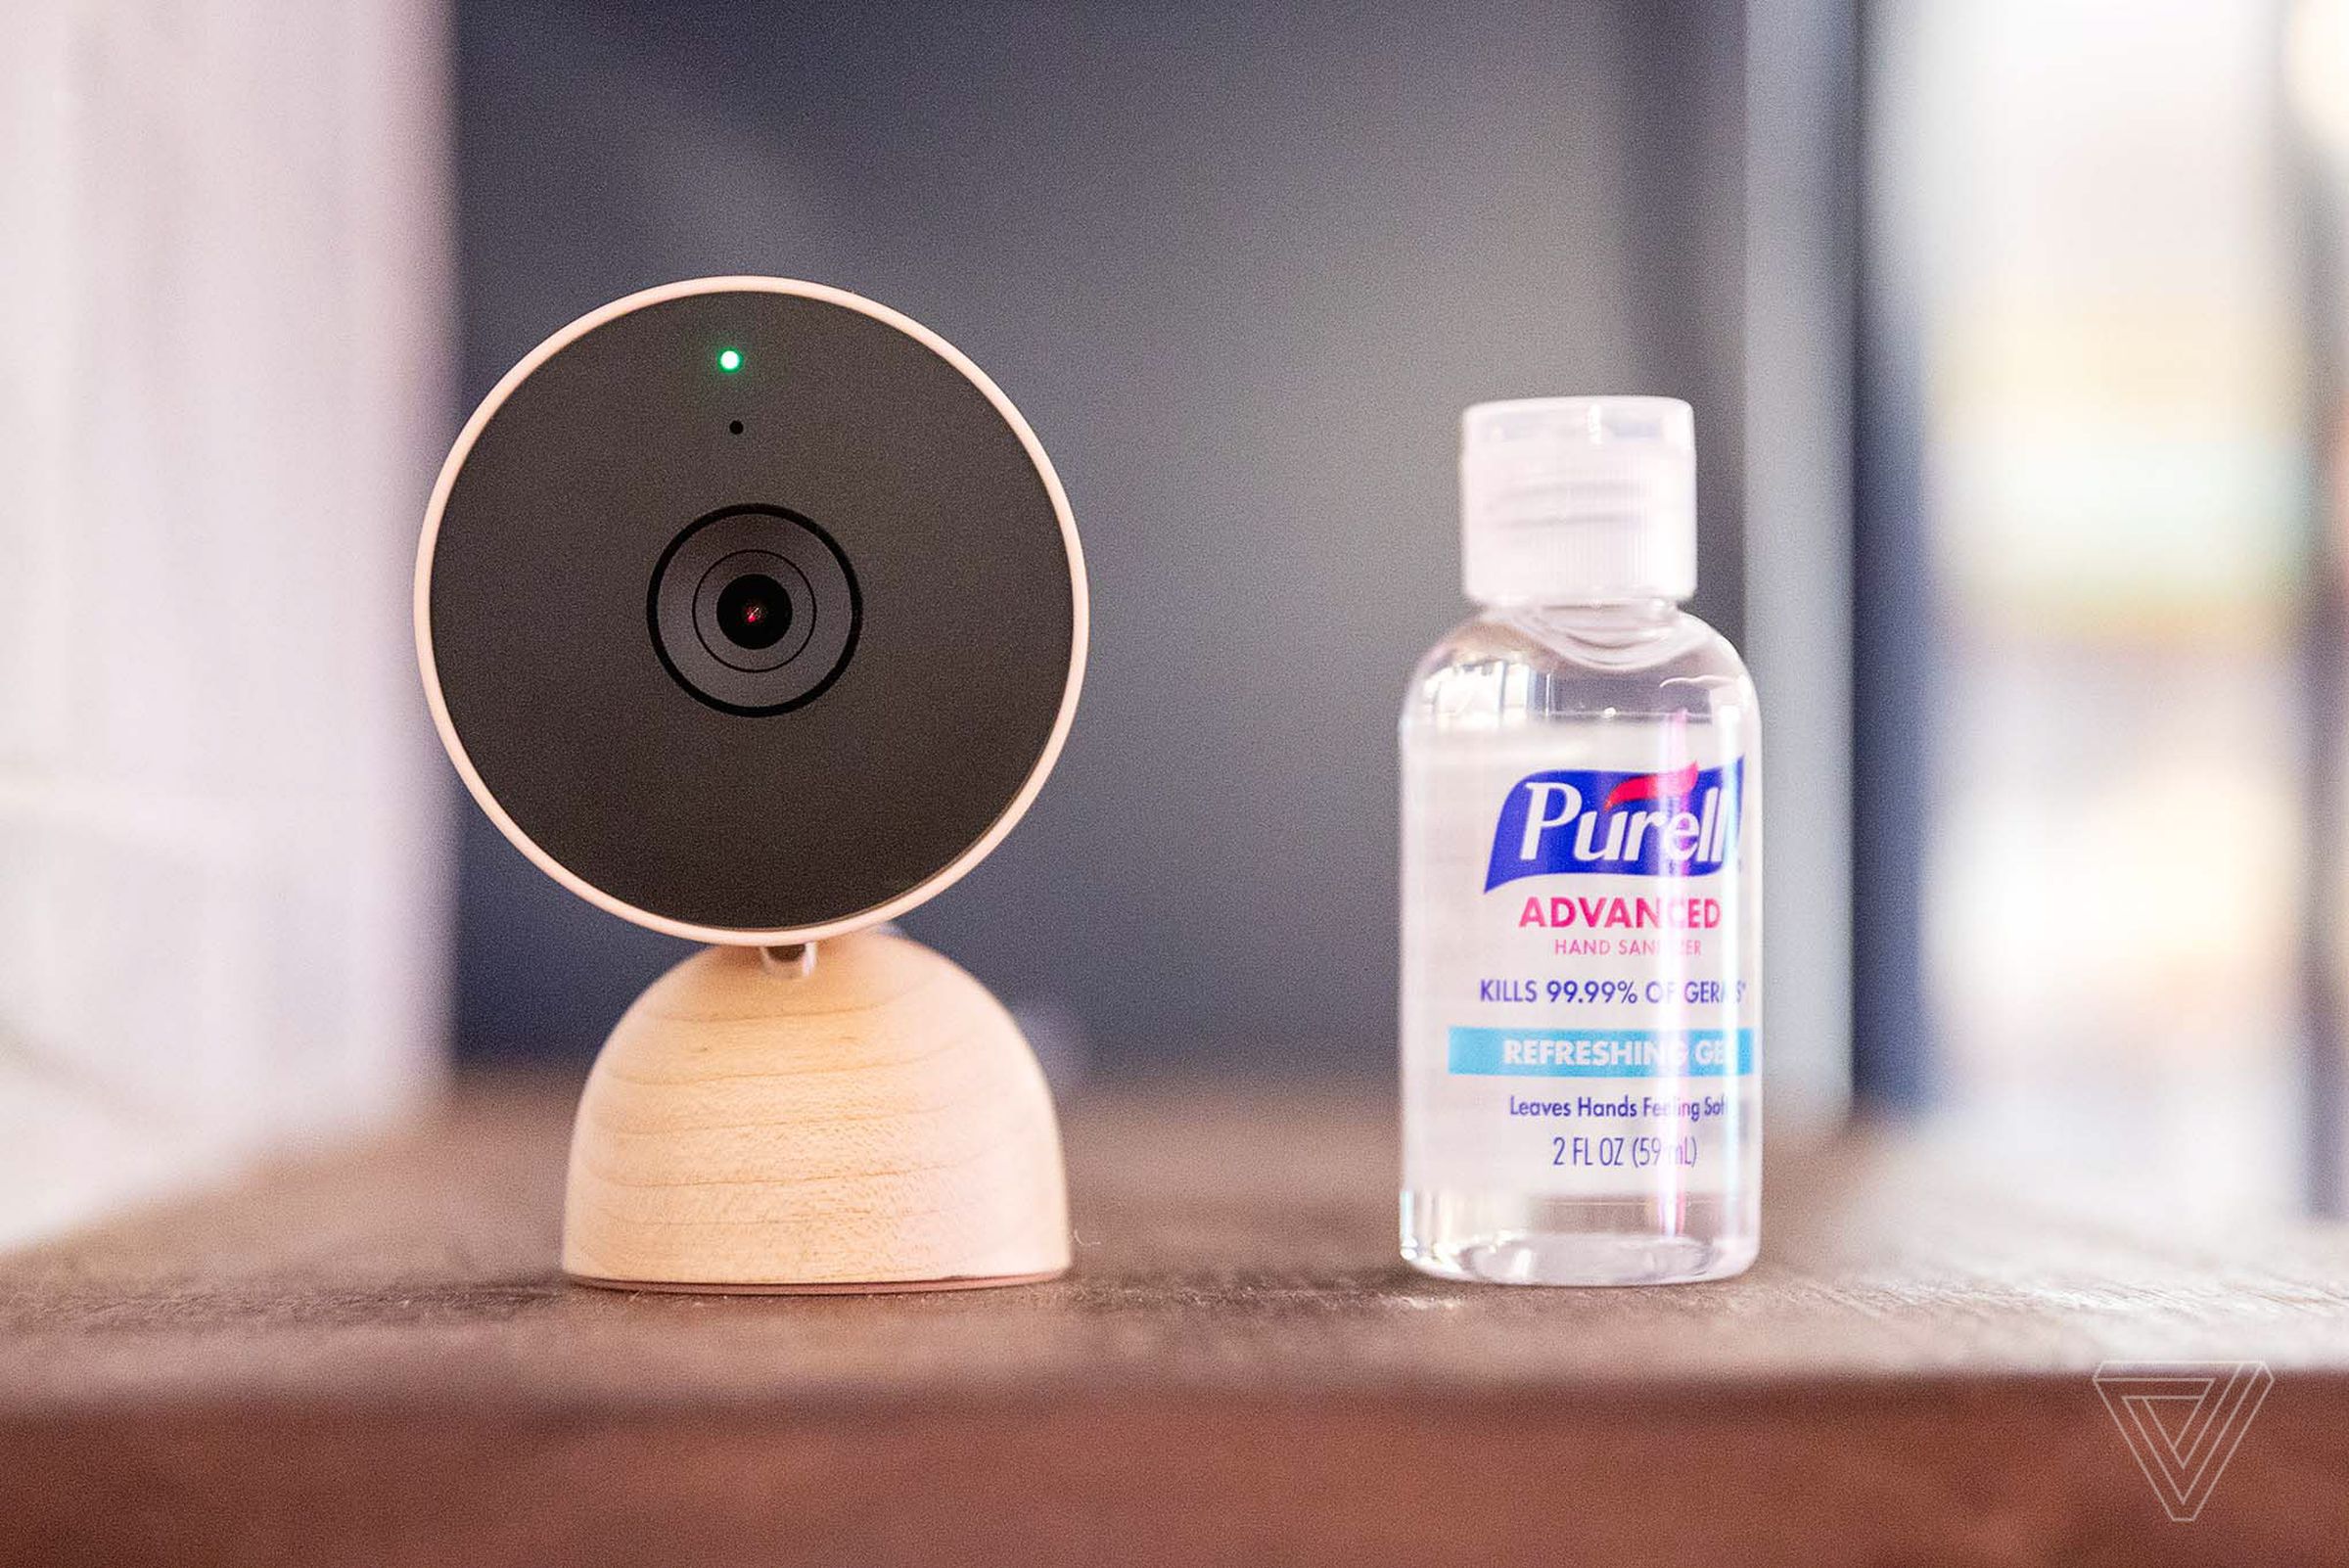 The Nest Cam is only slightly taller than a travel sized bottle of hand sanitizer.